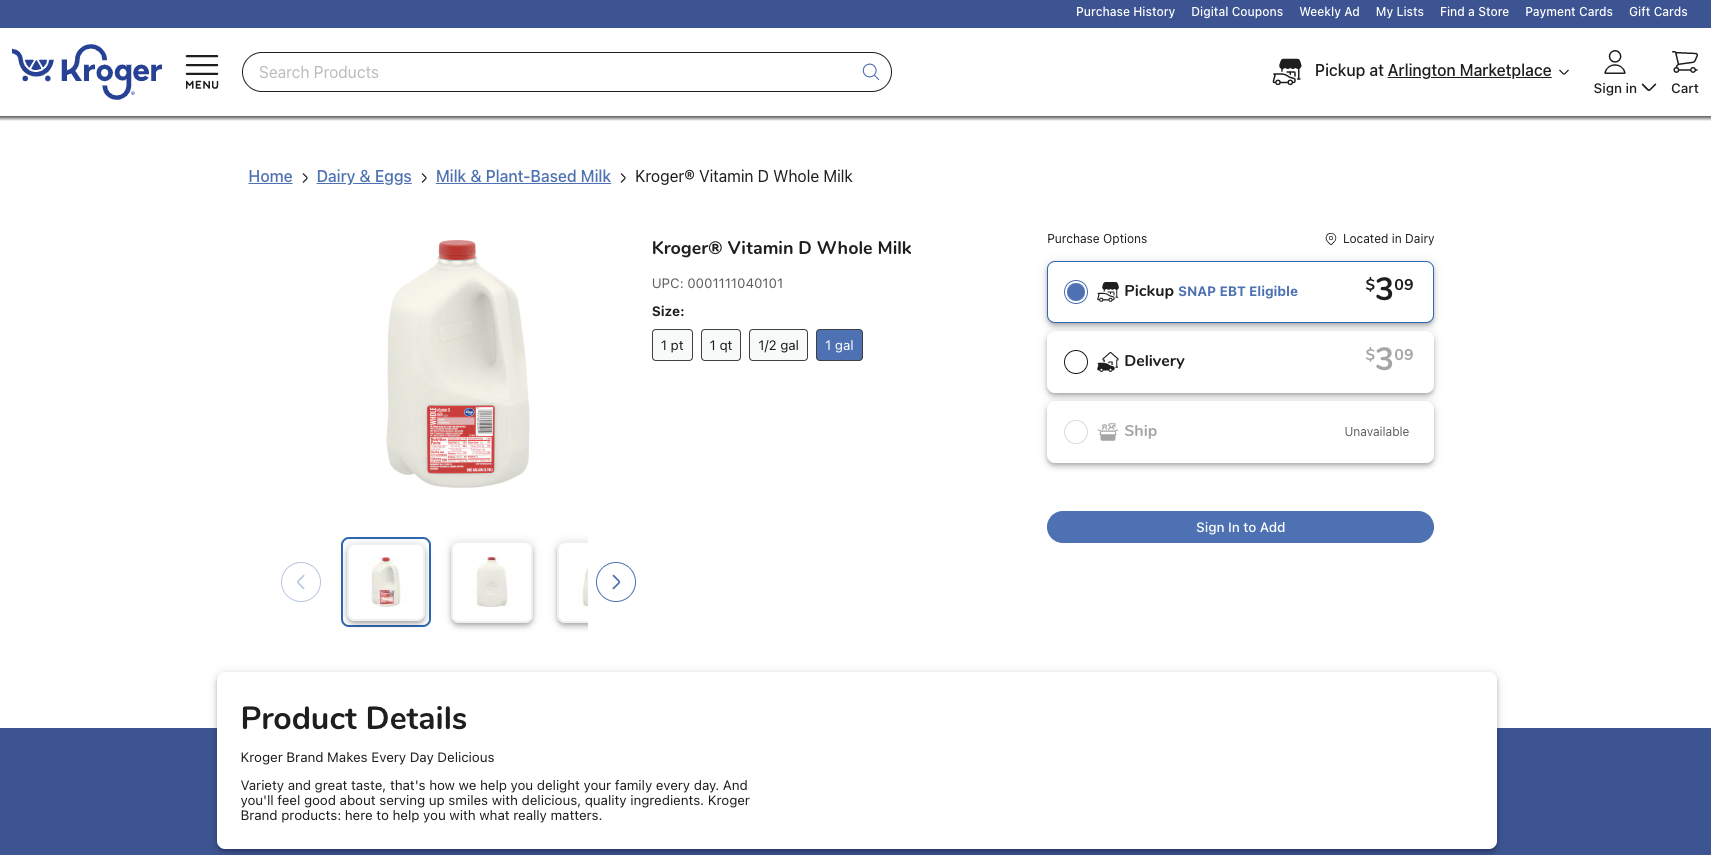 A screenshot showing the current price of a gallon of whole milk